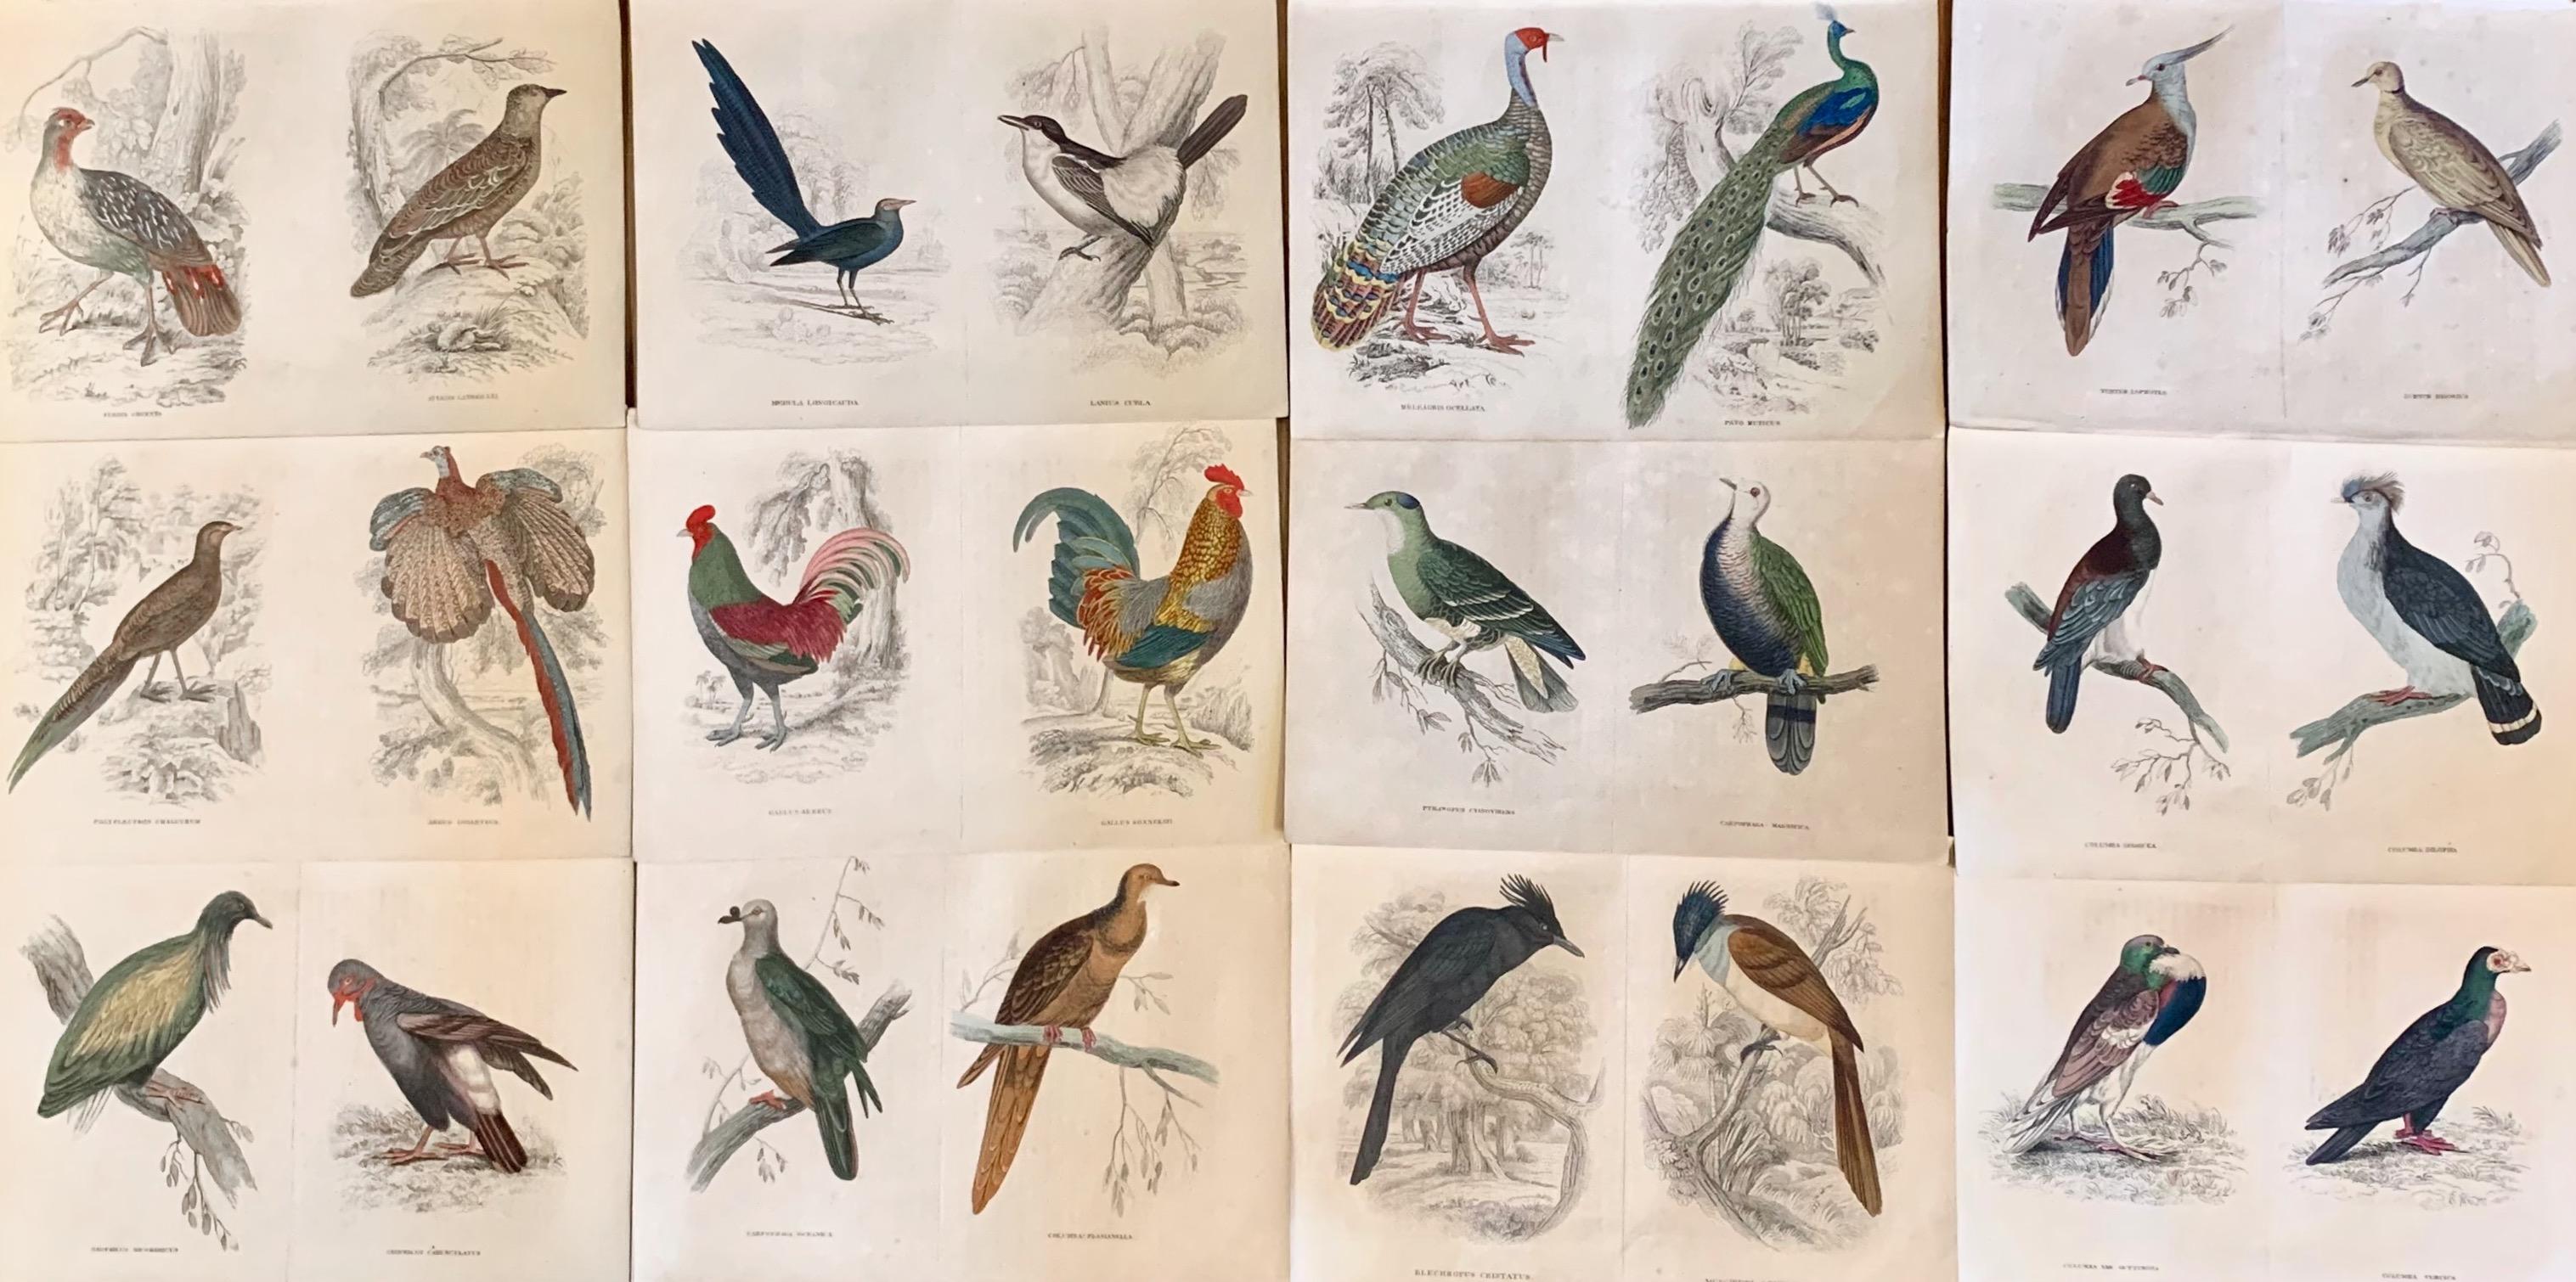 Sir William Jardine, 7th Baronet (after) Animal Painting - Antique Prints of Rare Exotic Game Birds - Peacock Pheasant Rooster Gamebirds